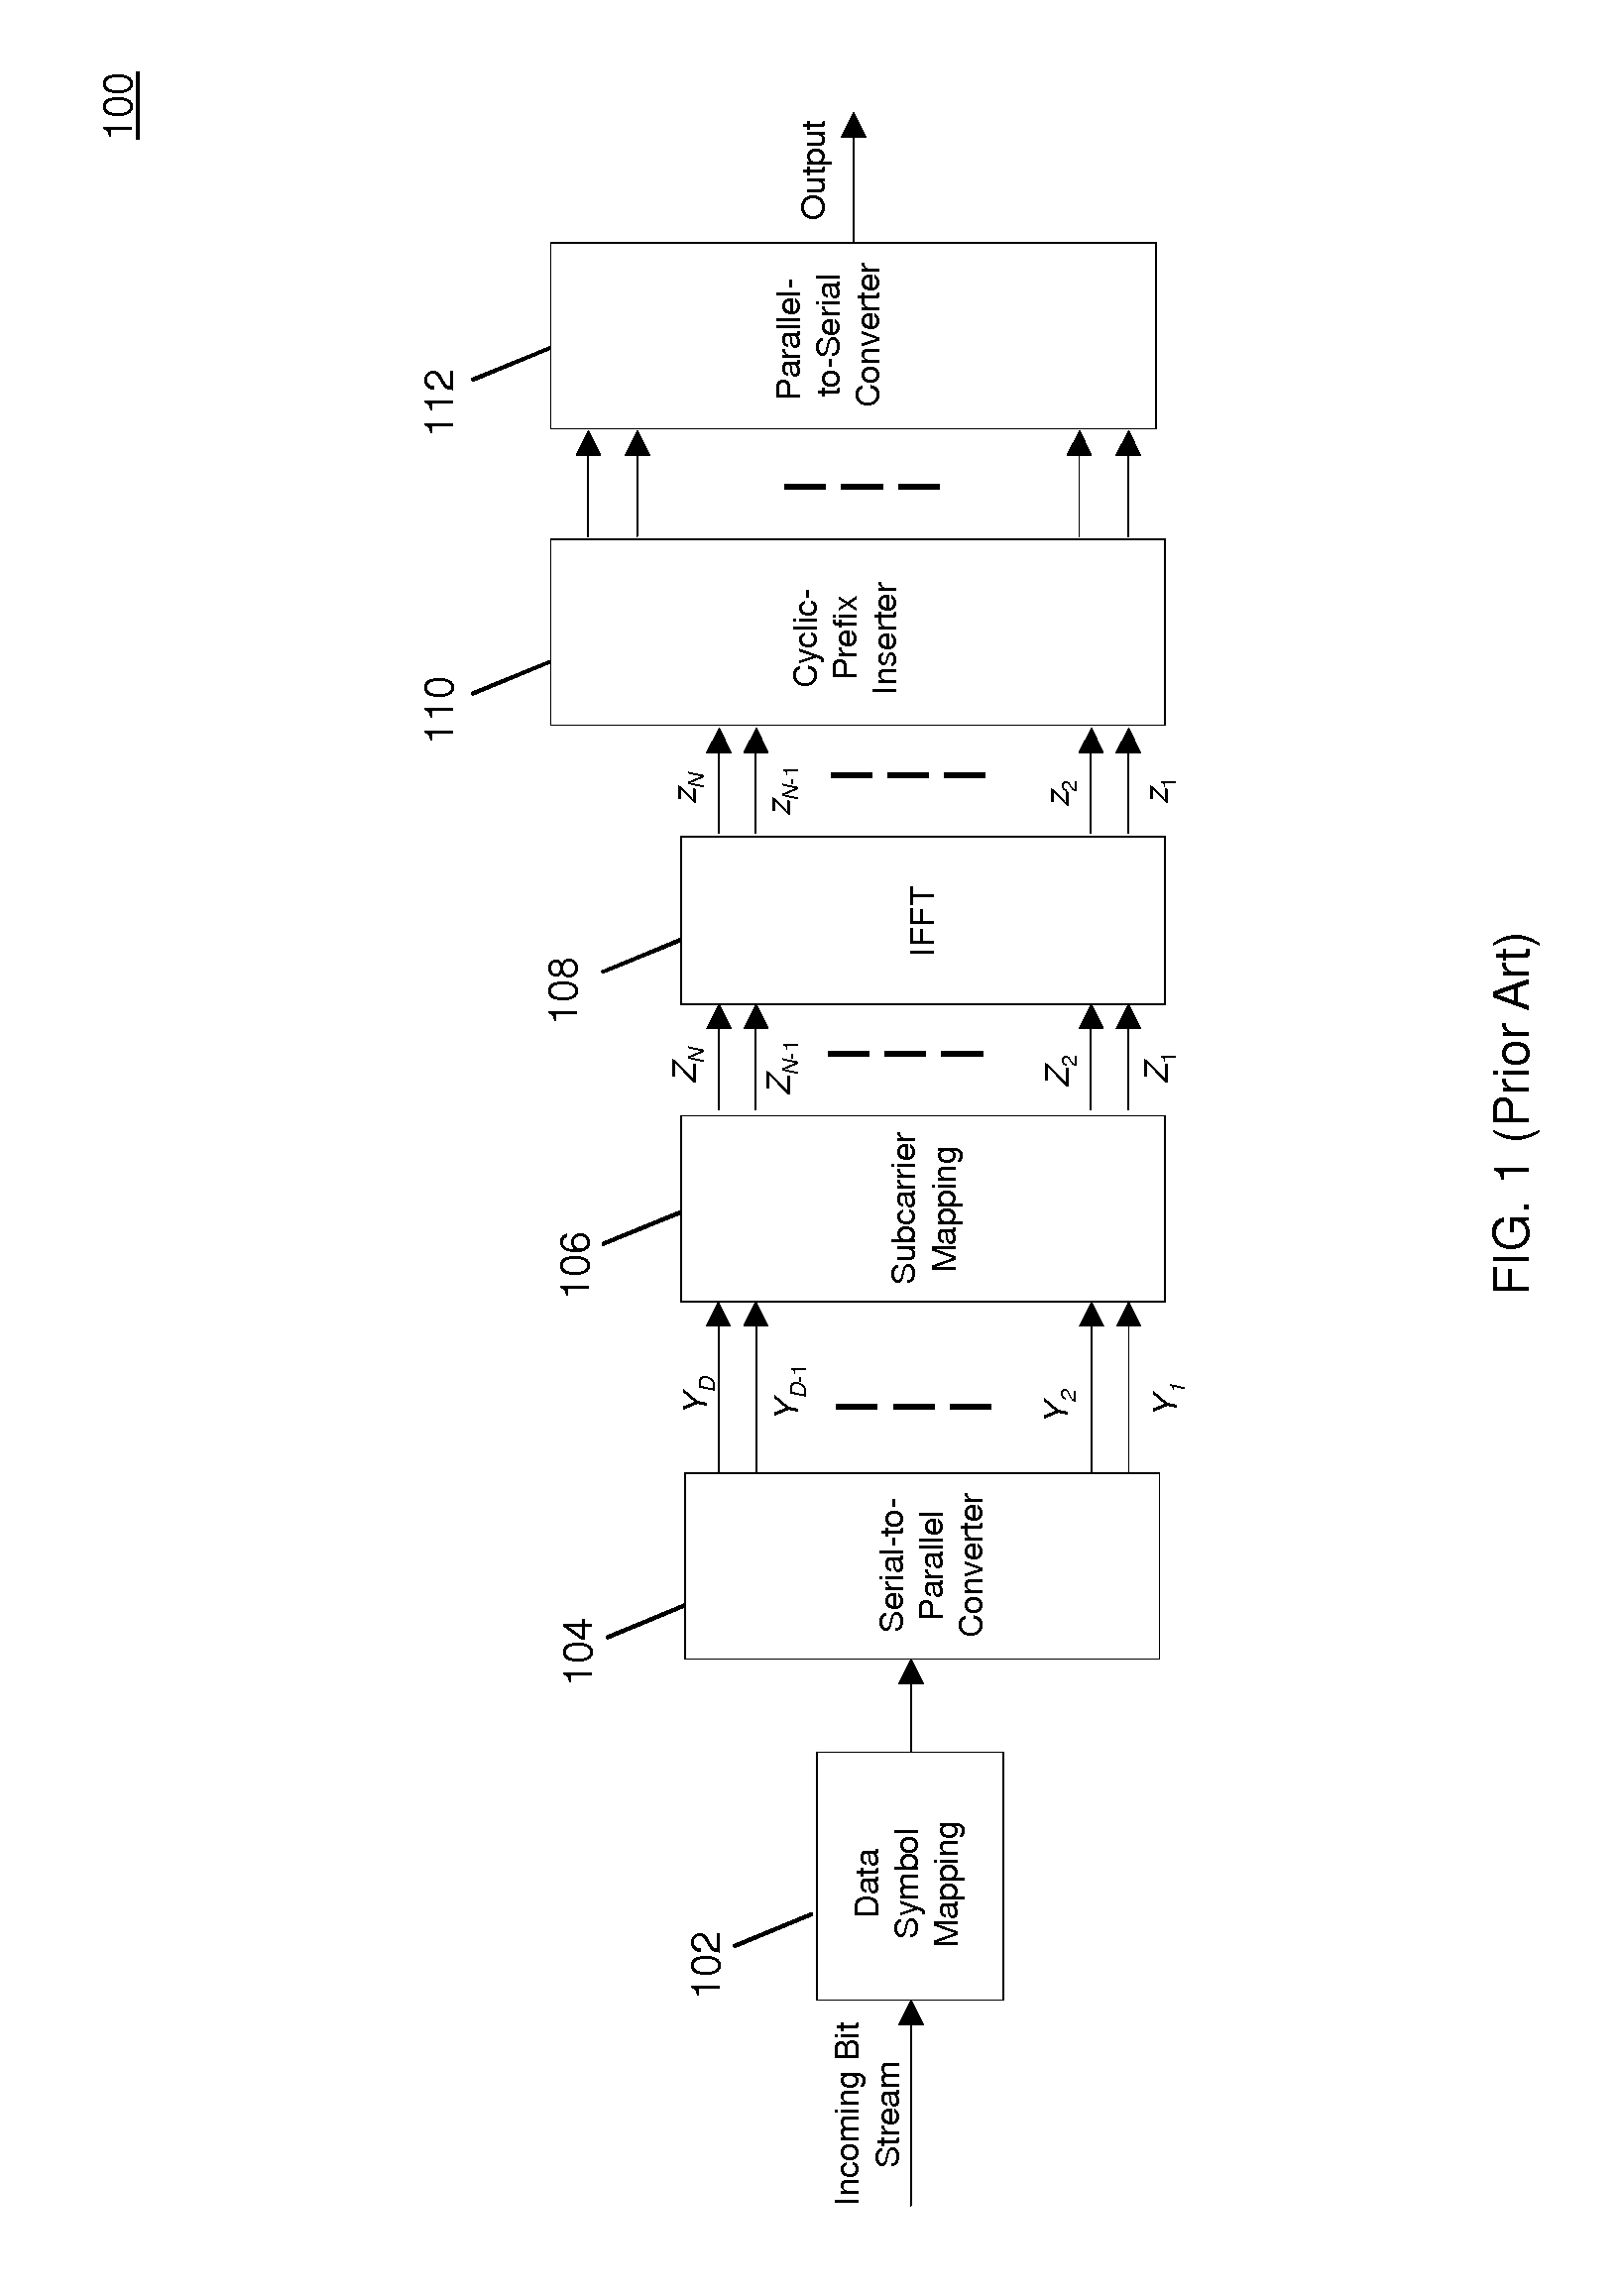 Dynamically selecting methods to reduce distortion in multi-carrier modulated signals resulting from high peak-to-average power ratios